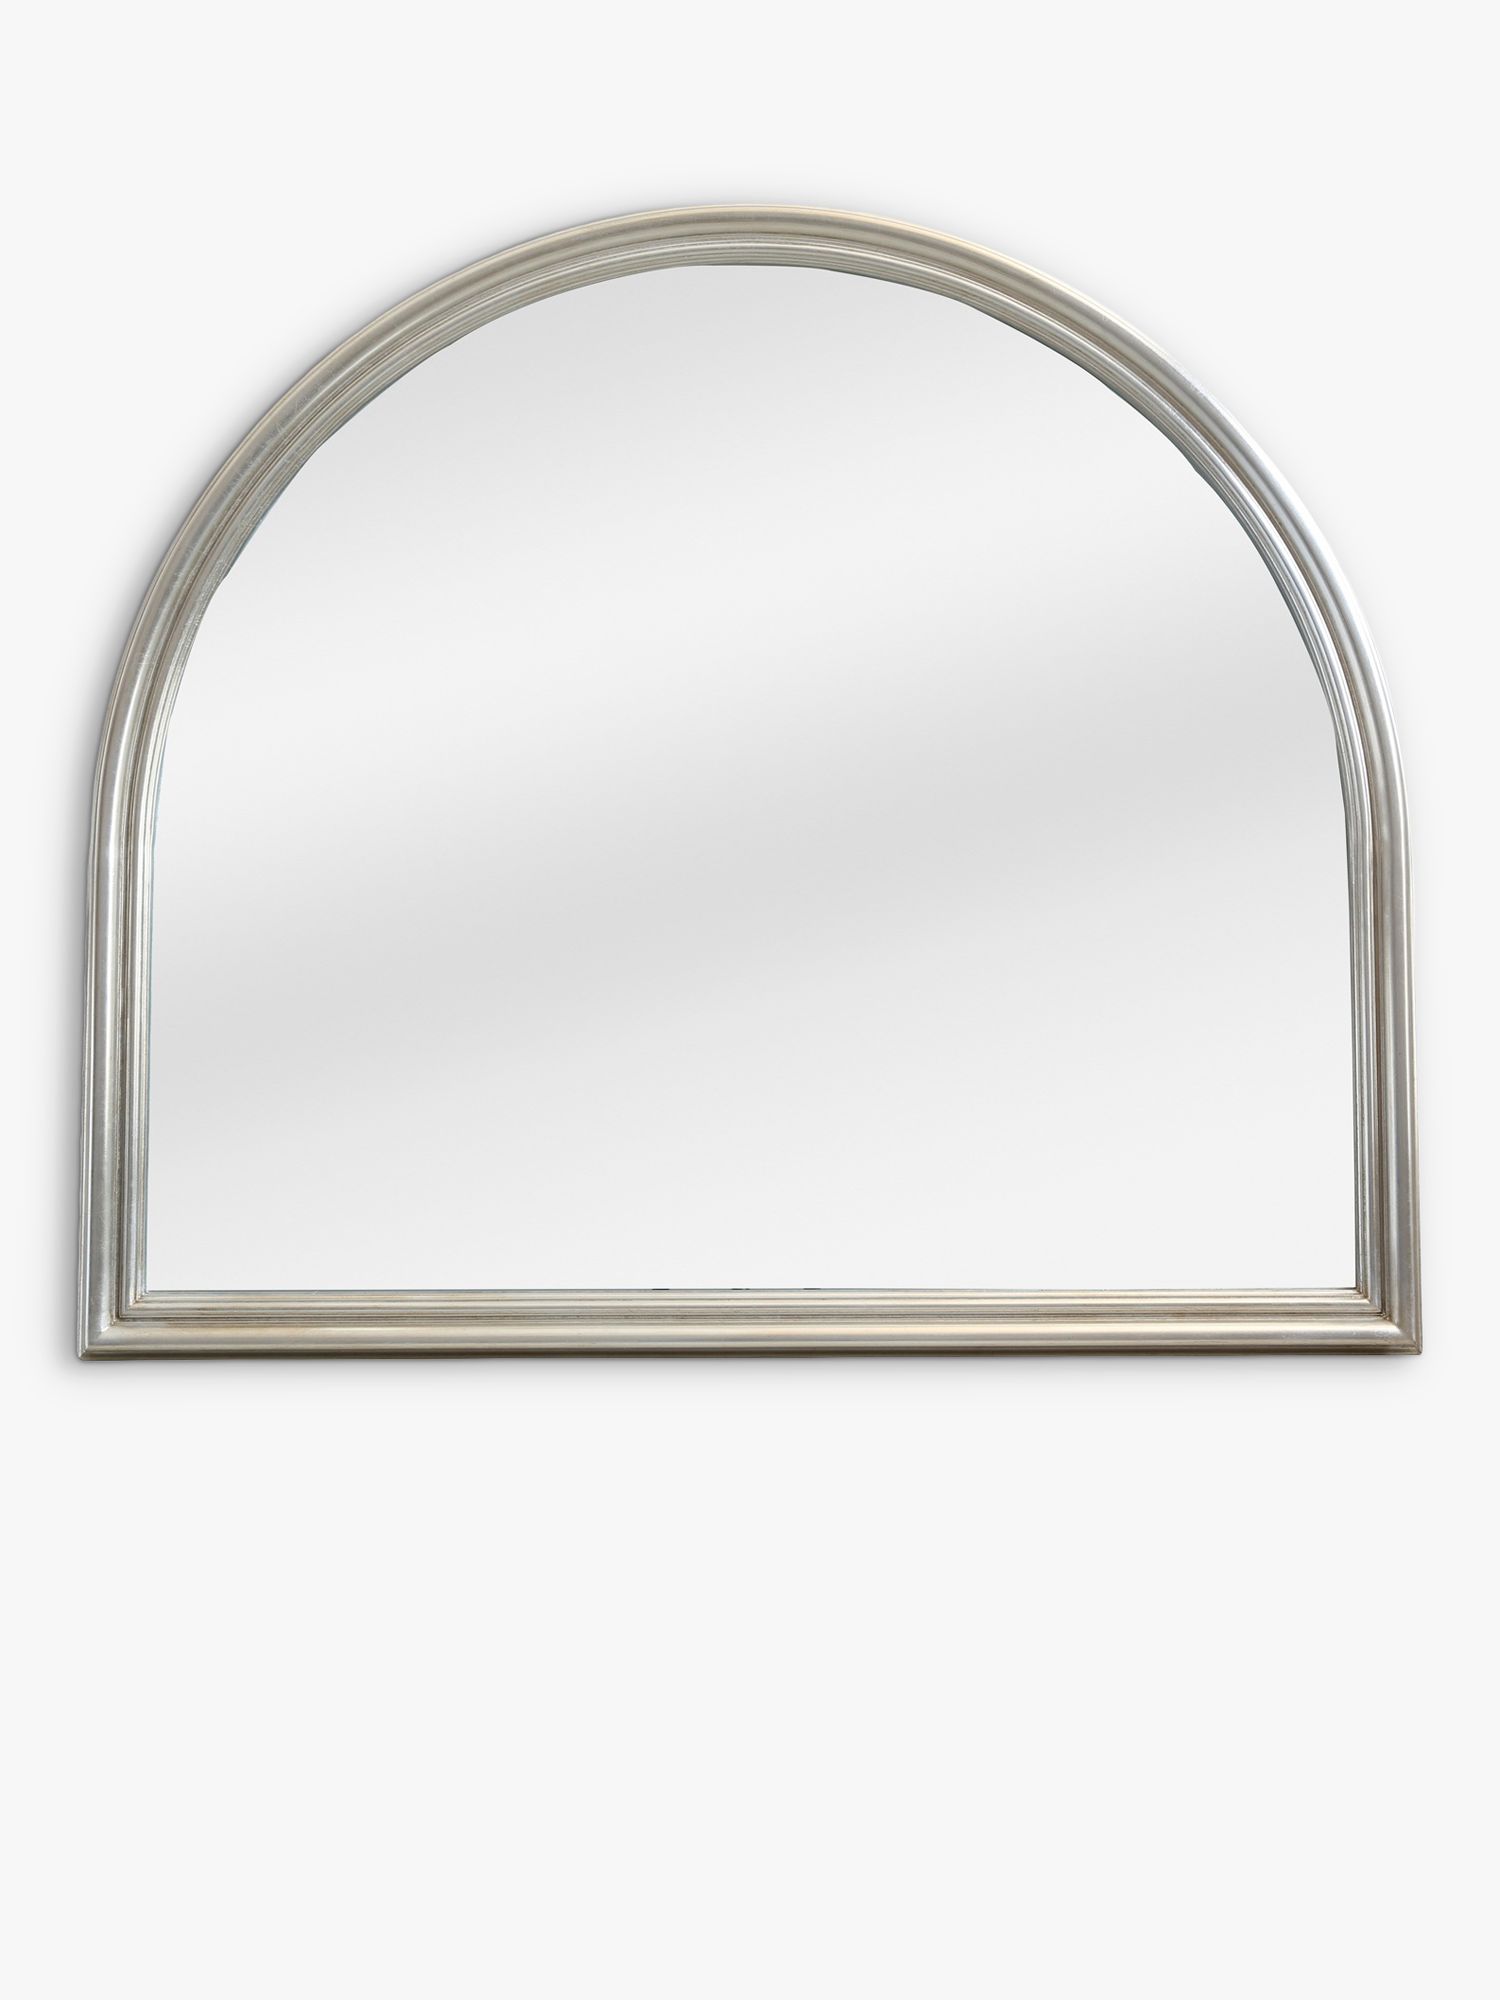 Overmantle Mirrors John Lewis Partners, Over Mantle Mirror John Lewis